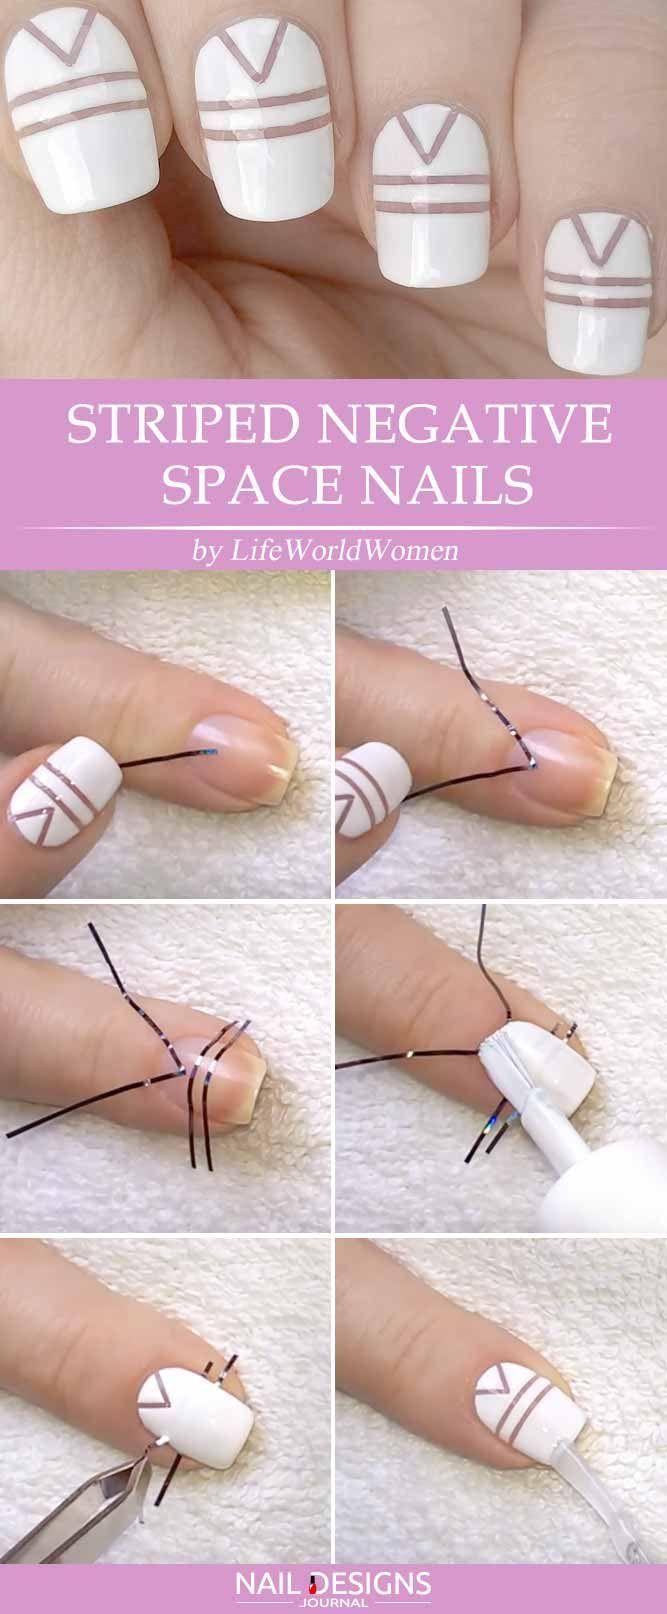 Wedding - Easy And Unique Striped Nails Ideas To Pull Of Right Now